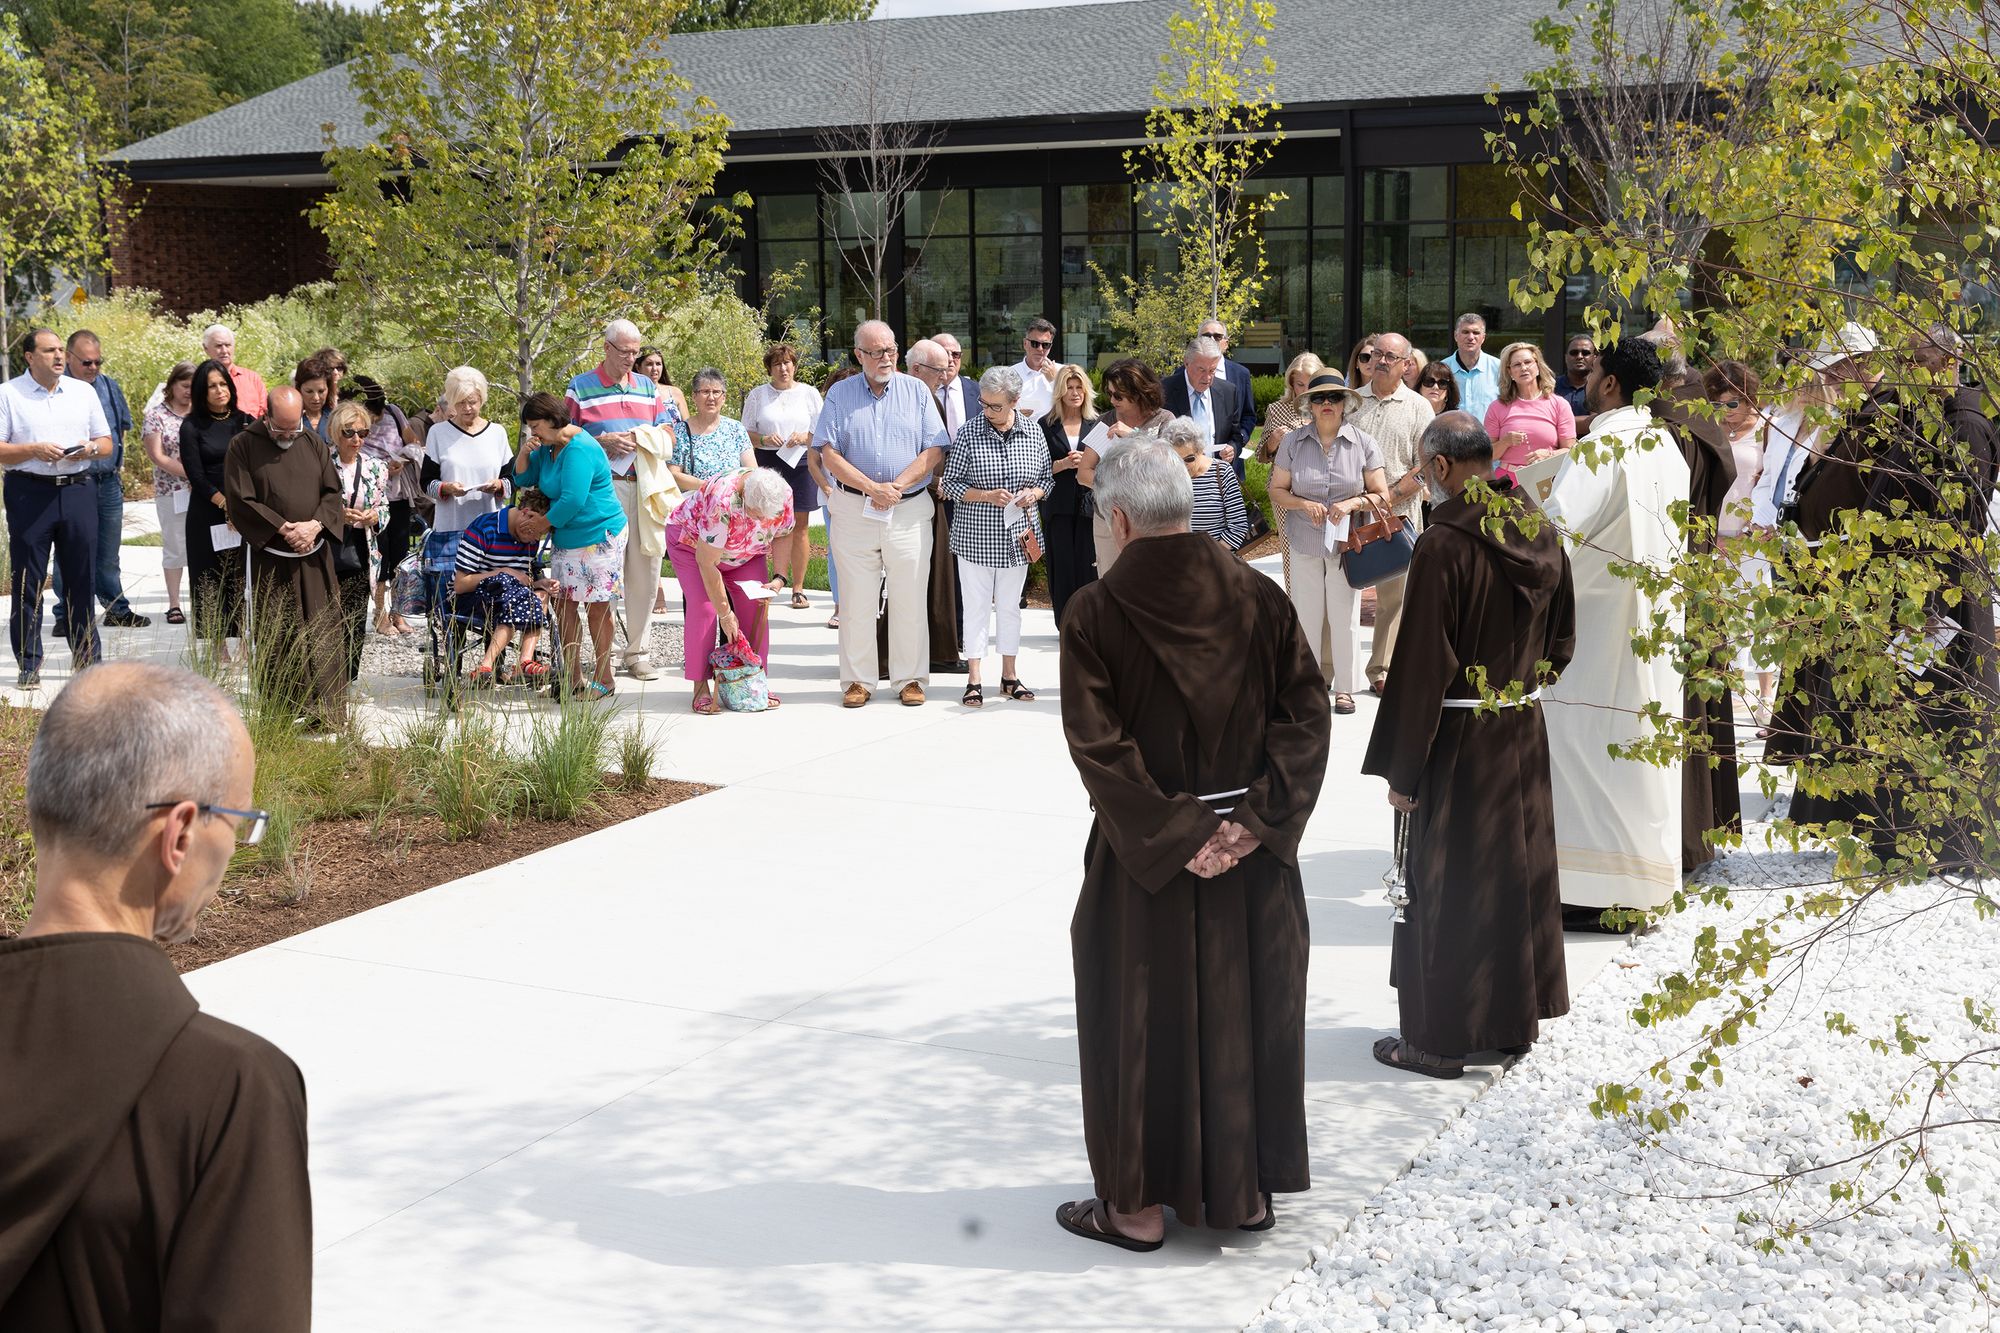 A landscape color photograph of a crowd of friars, benefactors and other supporters pray during the blessing and dedication of the Solanus Casey Center's new rosary garden, votive chapel and outdoor space.